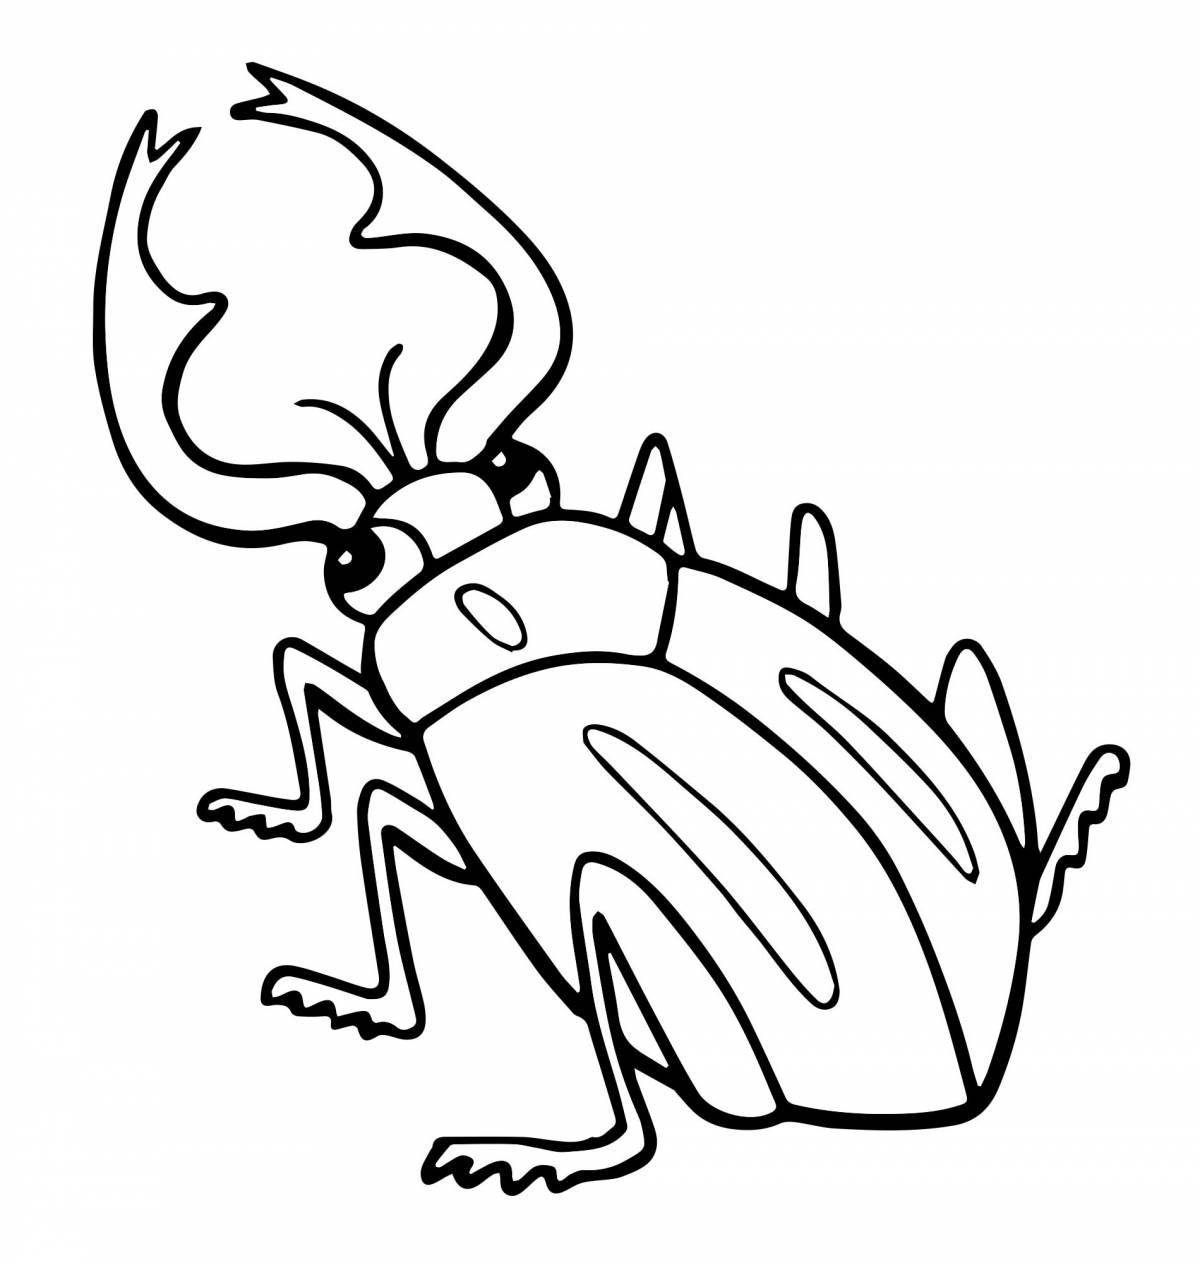 Great stag beetle coloring book